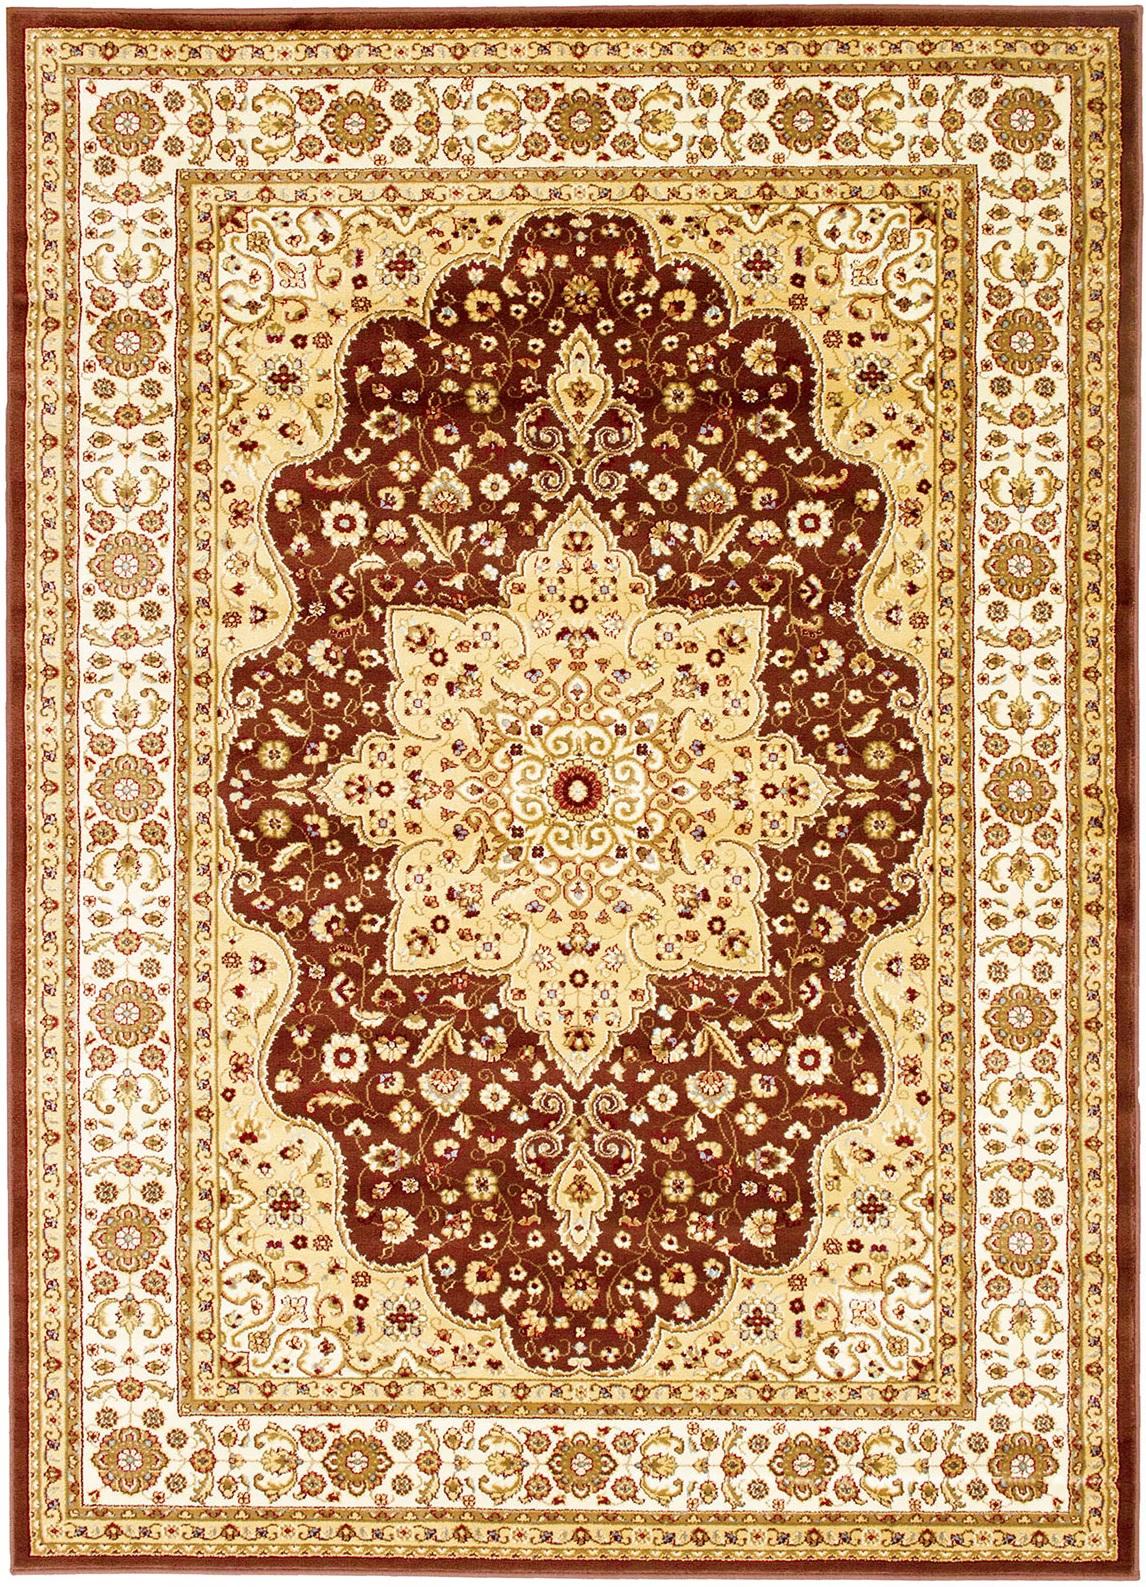 Contemporary Area Rug RG5171 Altay RG5171 in Chocolate 